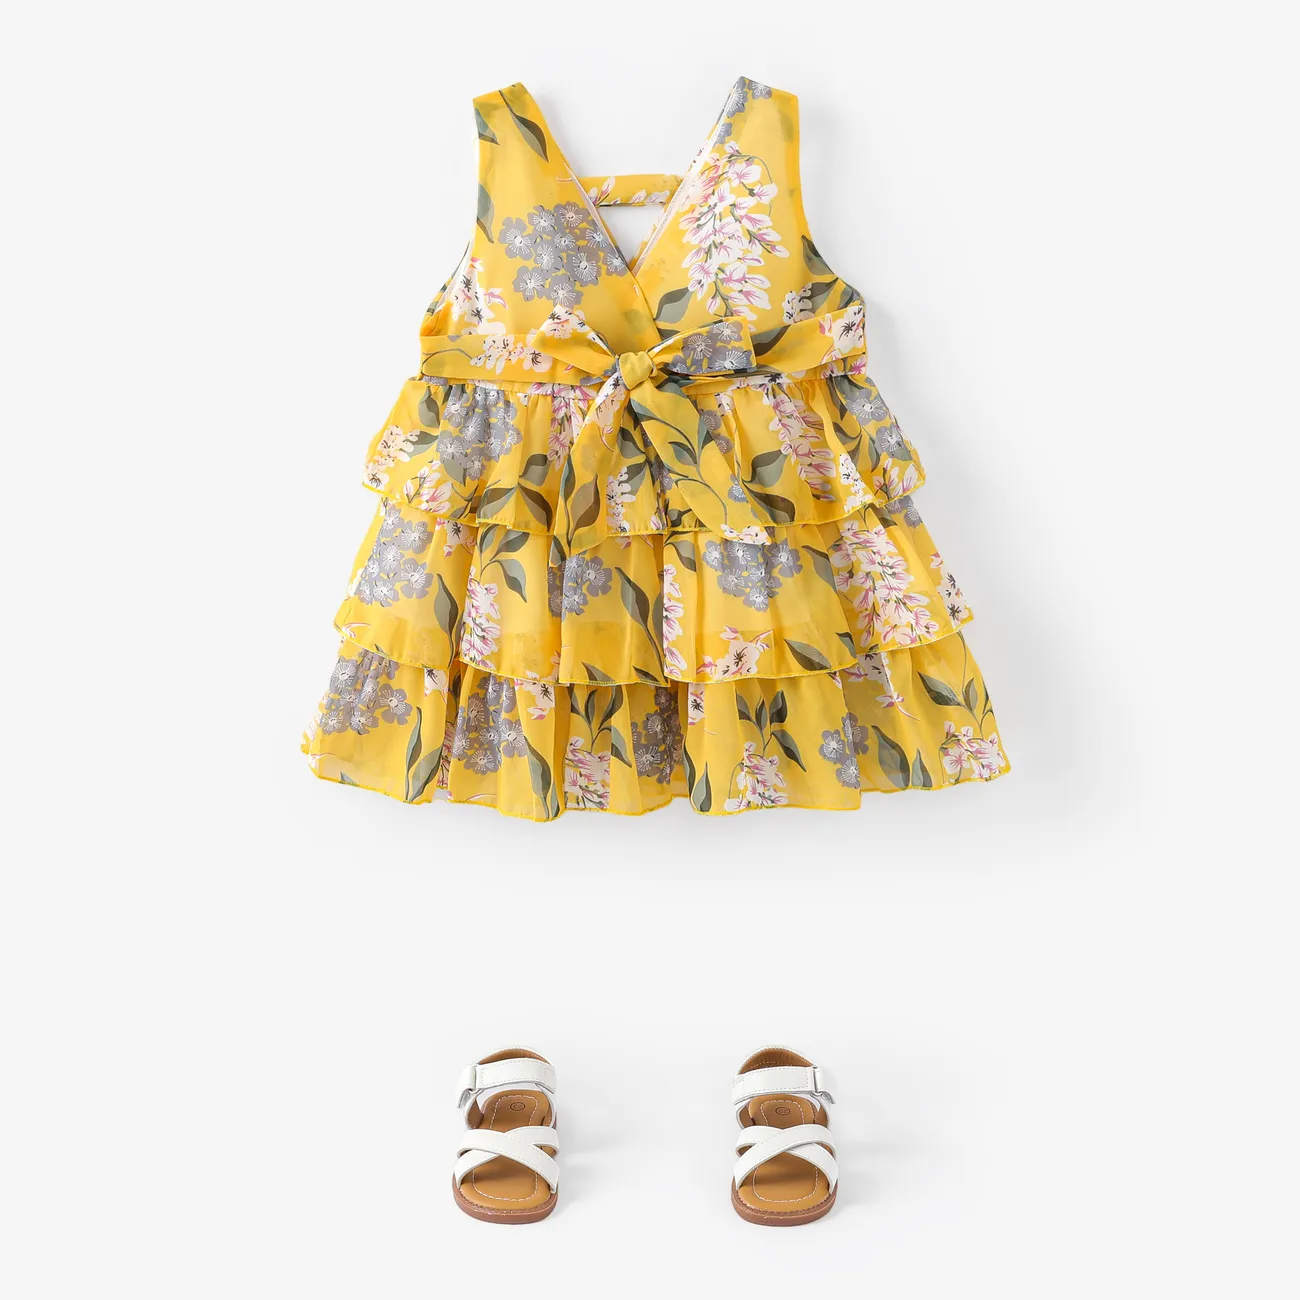 Baby / Toddler Girl Pretty Floral Print Layered Dresses Yellow big image 1